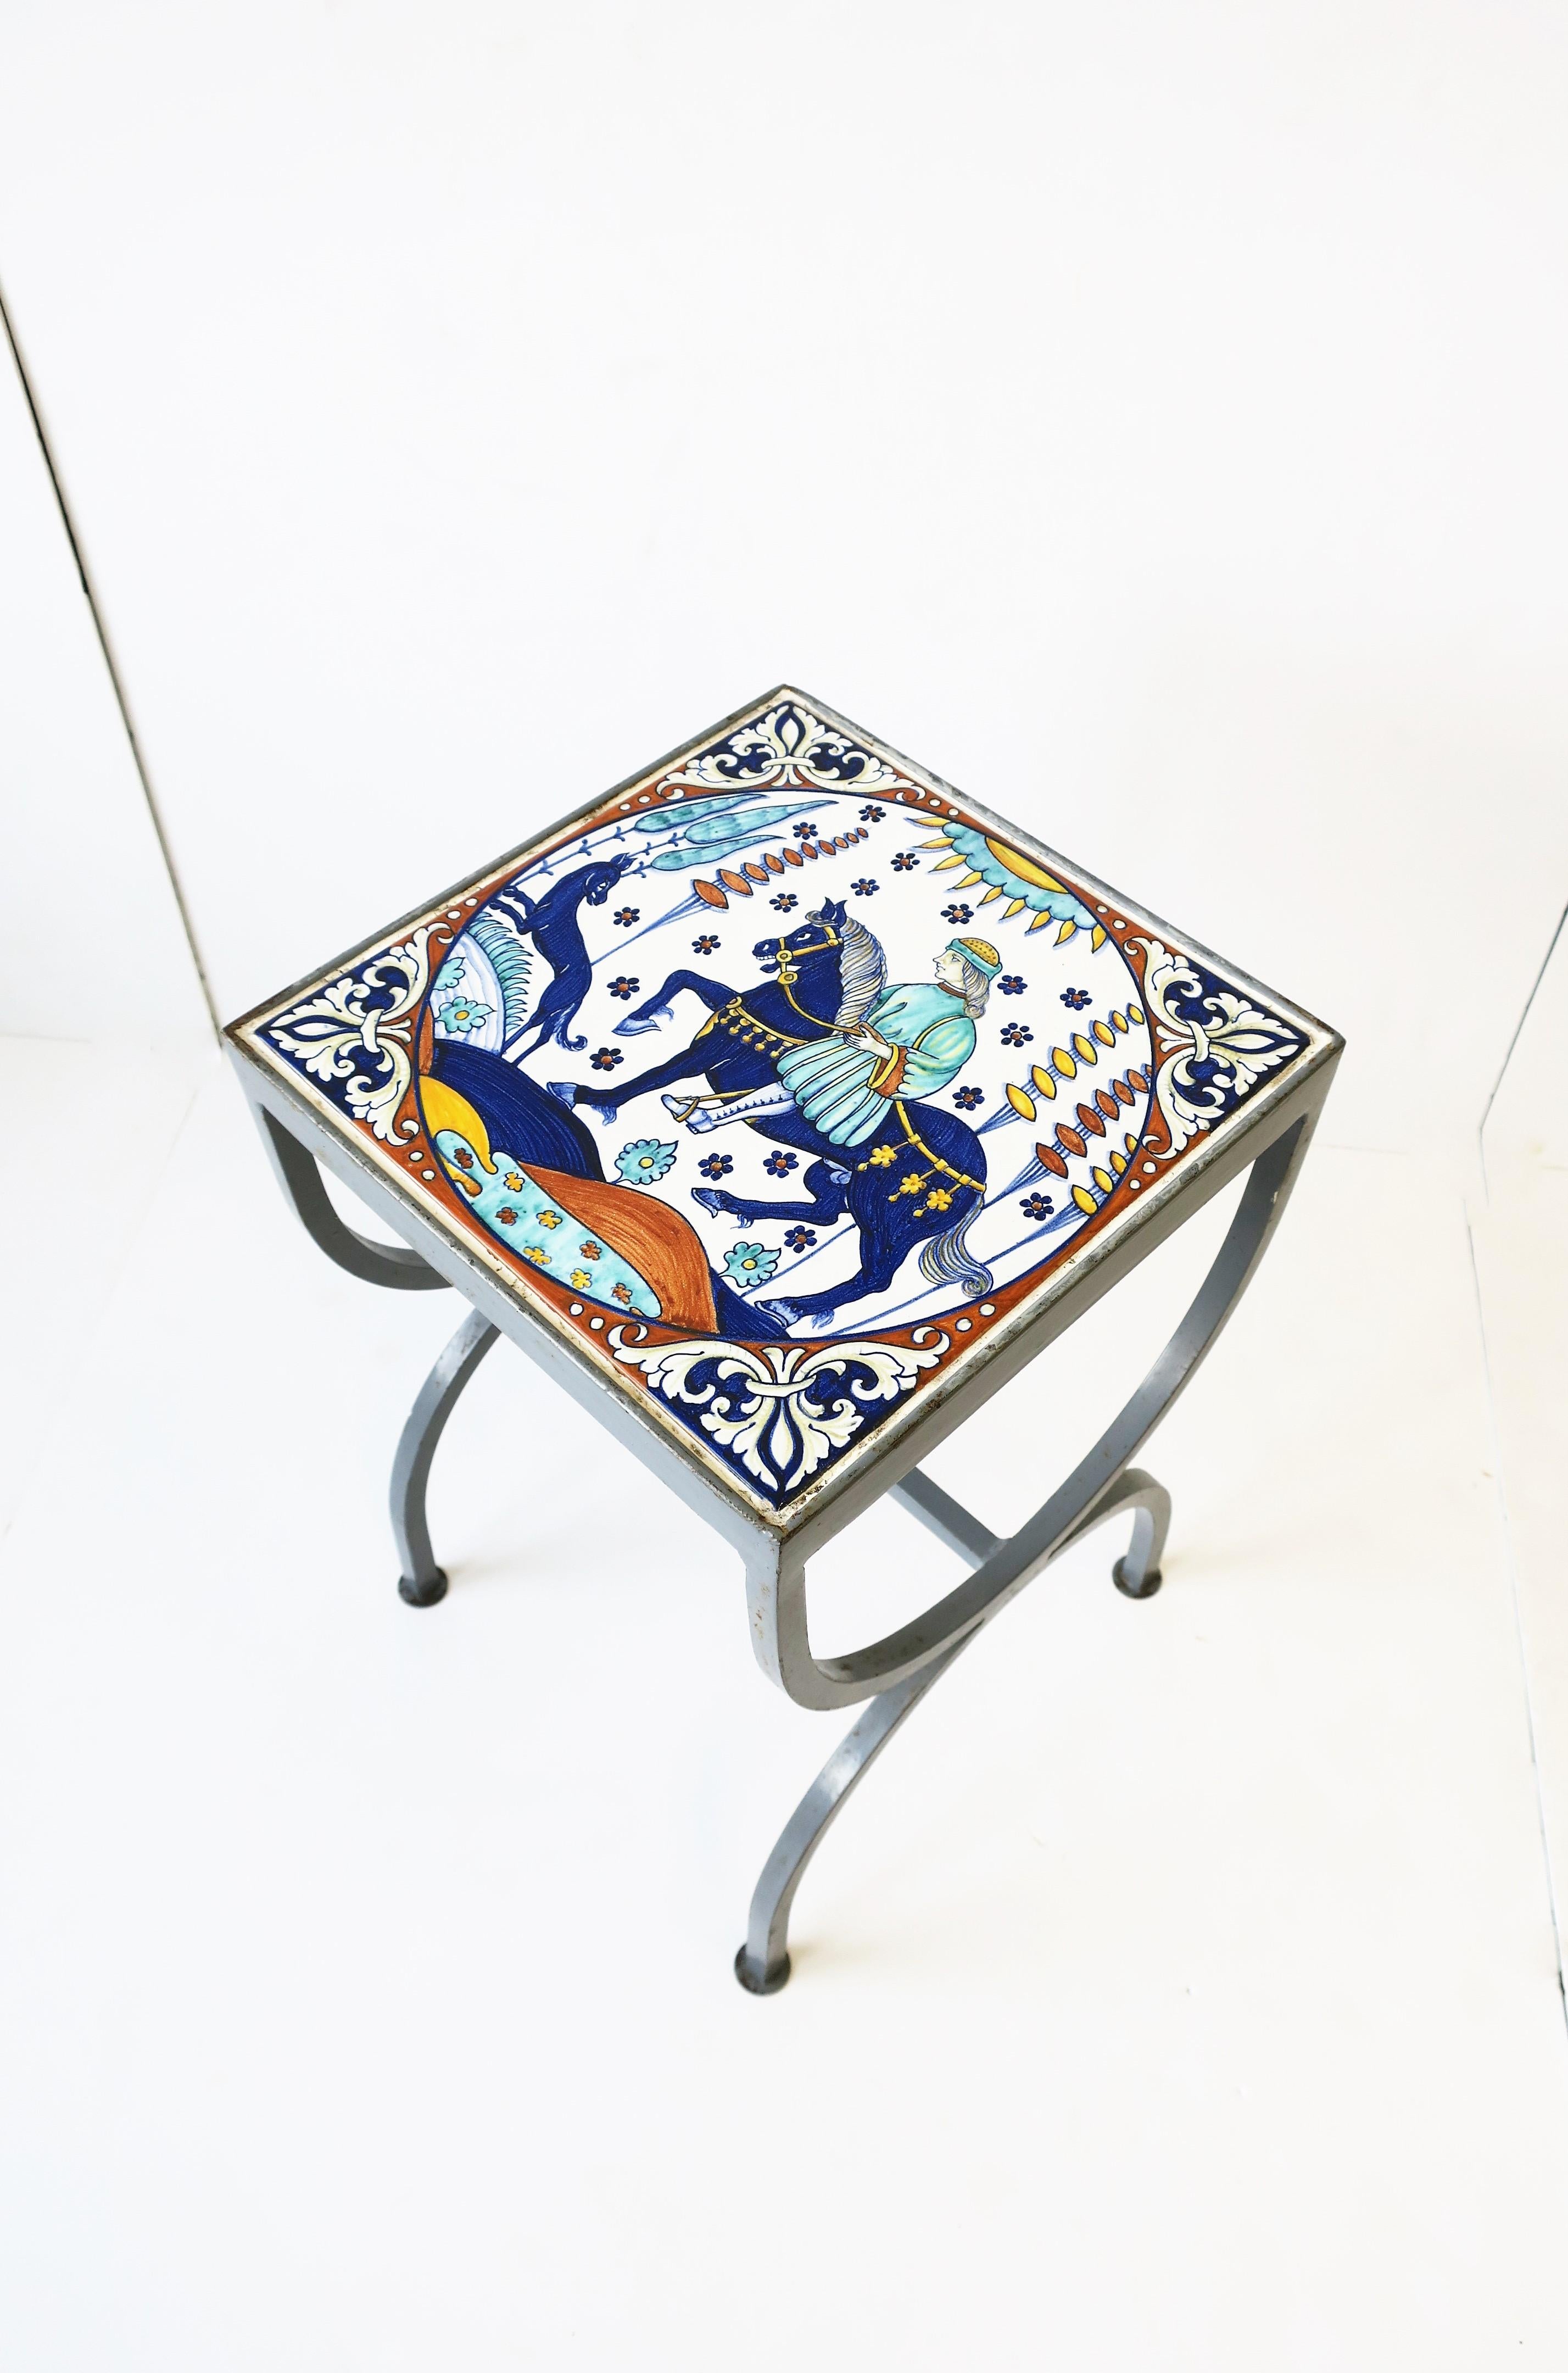 20th Century Tile Top Grey Metal Side or Drinks Table Indoors or Patio in the style of Hermes